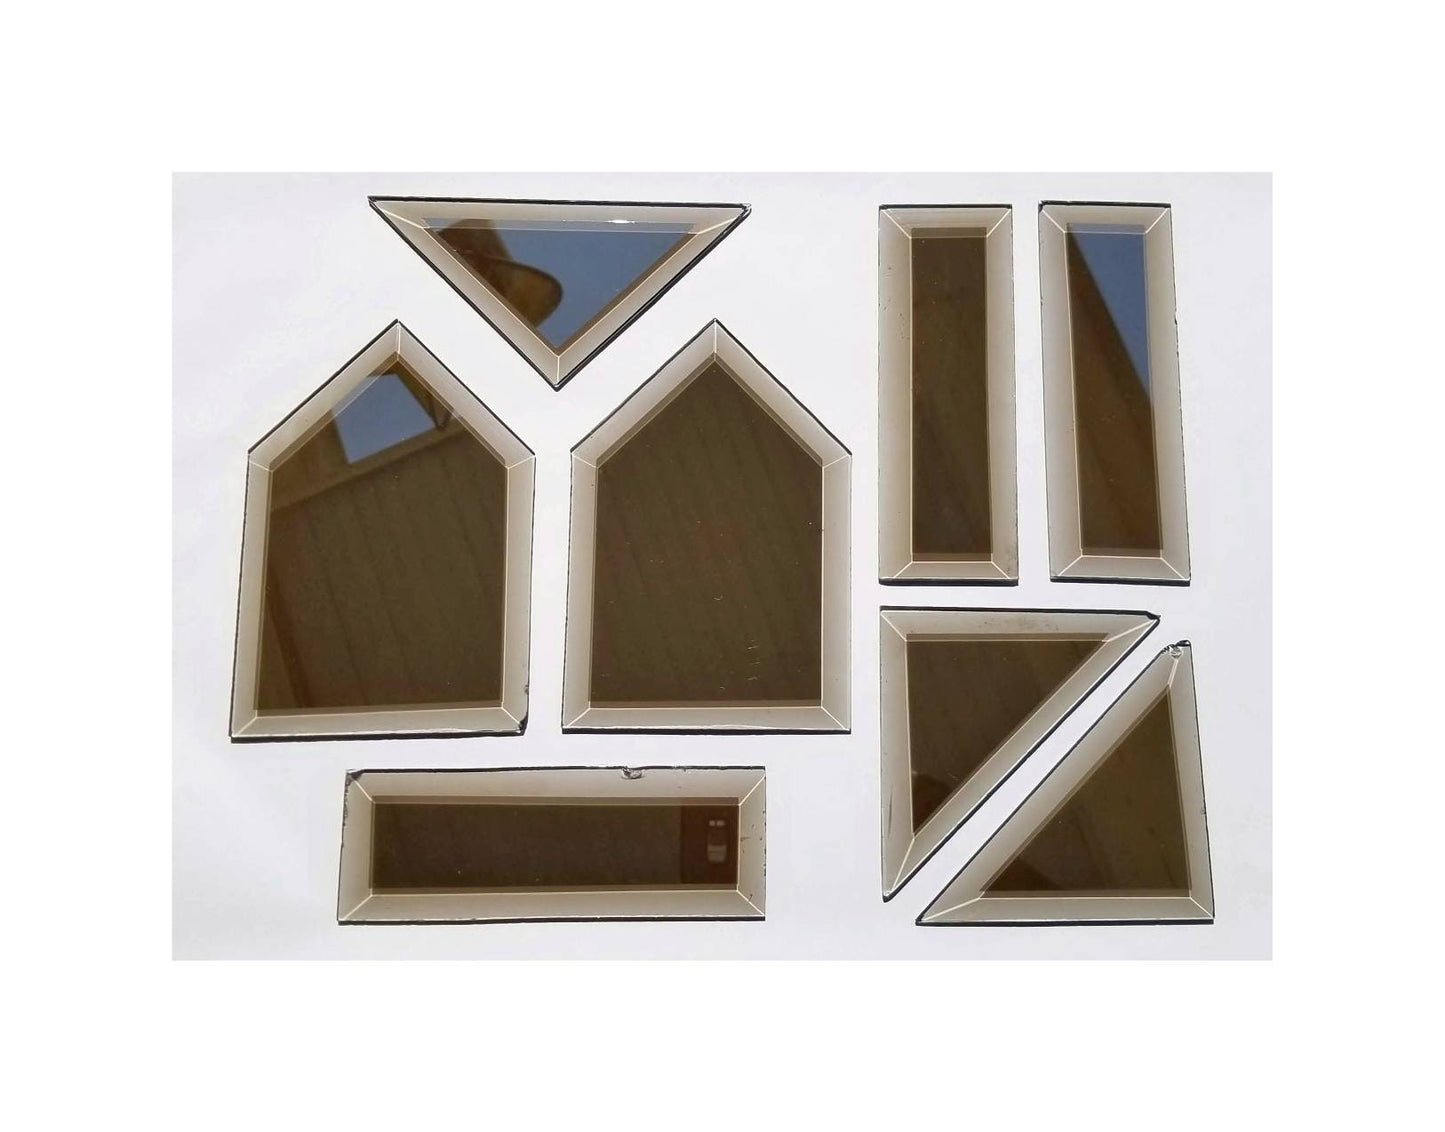 Bronze Stained Glass Bevels. Mirrored on the Front Surface to a Smokey Glass. Unusual see thru Mirror, Vintage 1980's. 25 total, 3 shapes.